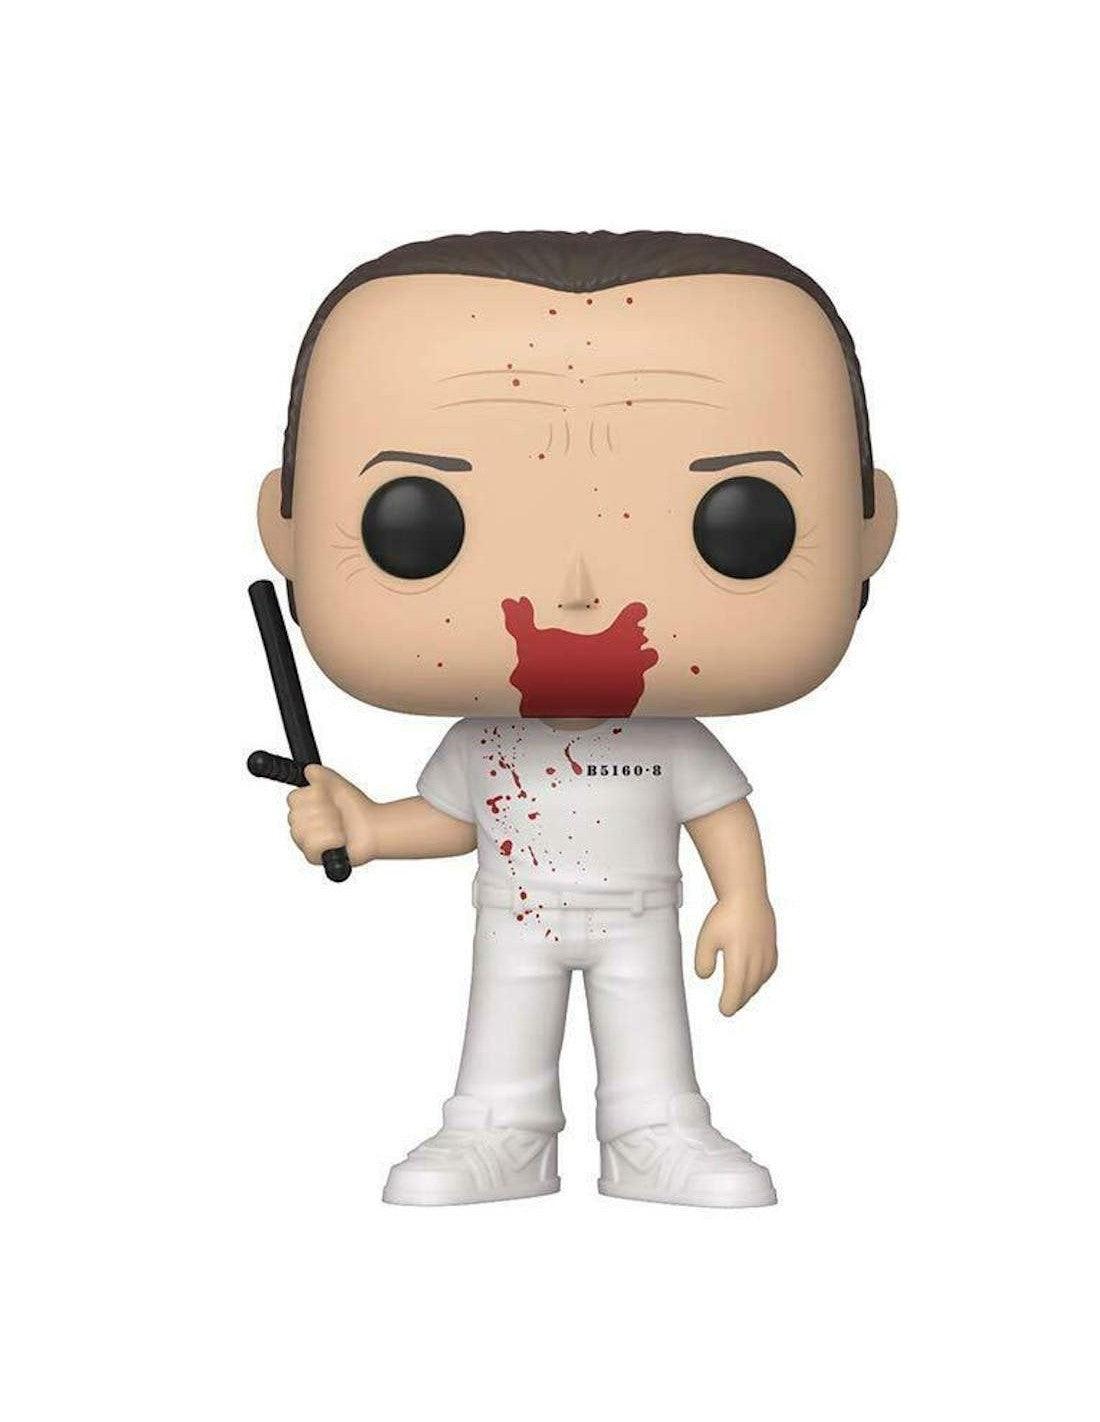 The Silence of the Lambs: Funko Pop! Movies - Hannibal Lecter #788 - Magic Dreams Store